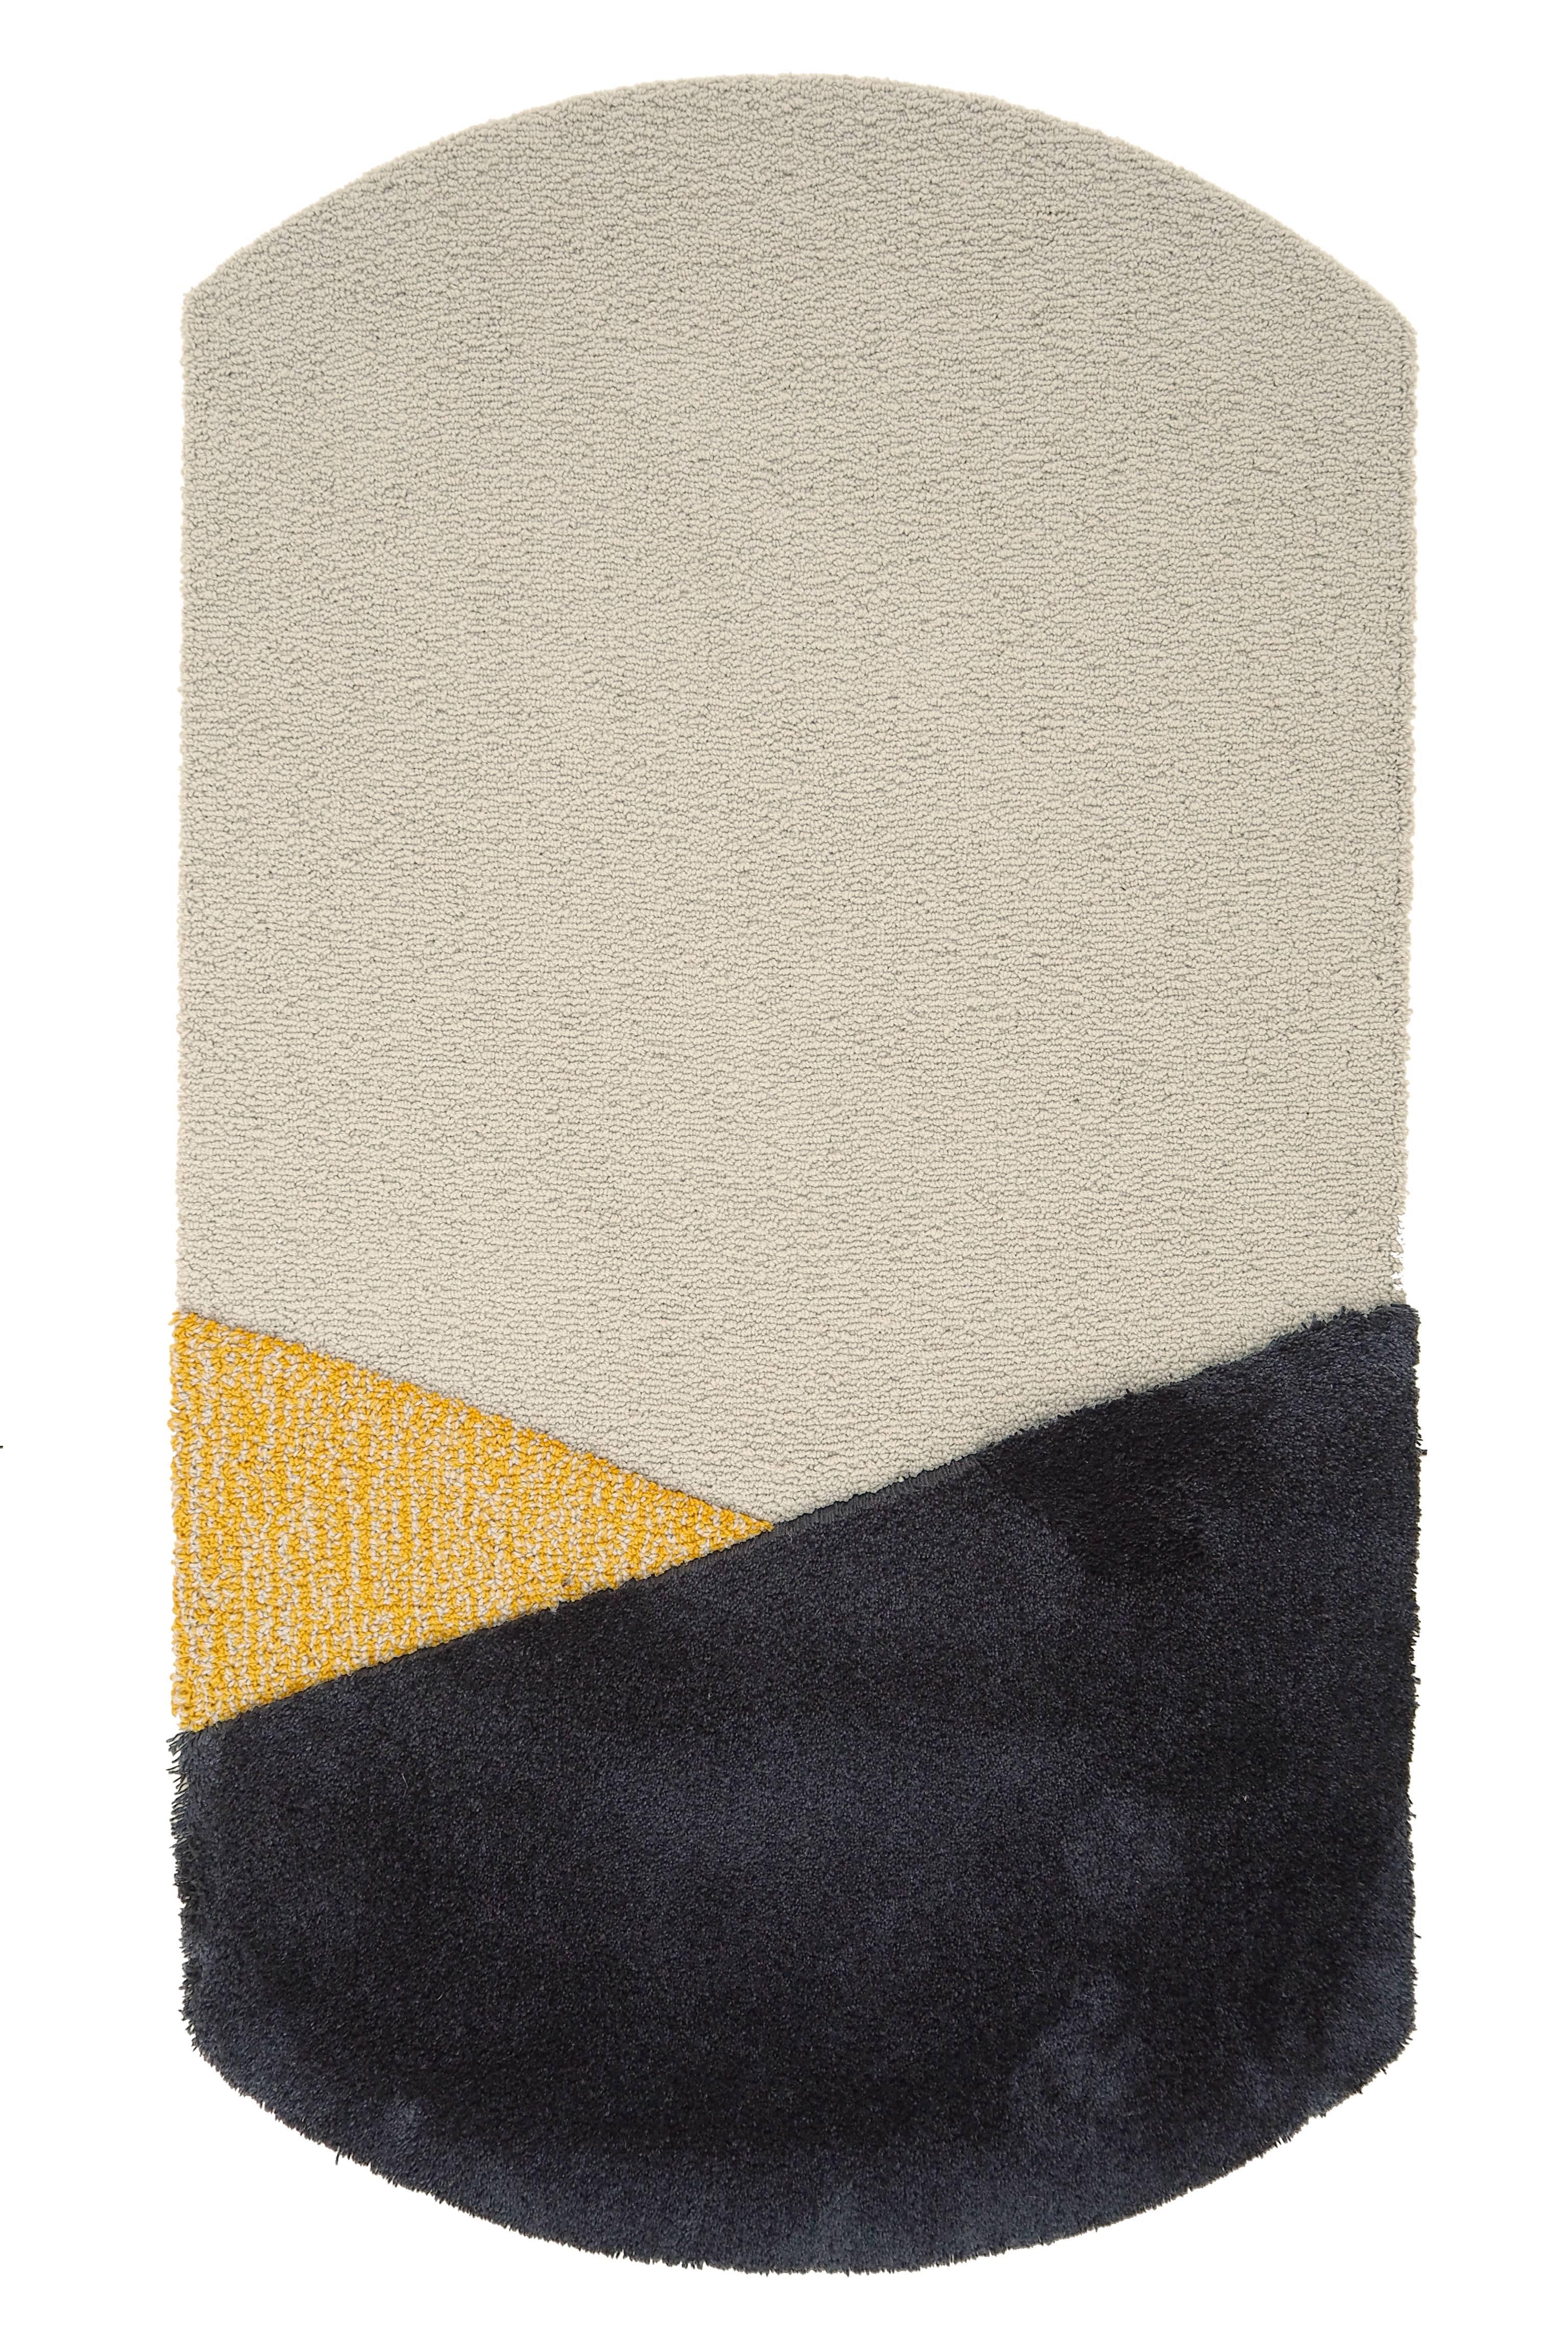 Yellow Oci Left Rug by Seraina Lareida
Dimensions: W 70 x H 130 cm 
Materials: 100% New Zeland top-quality wool.
Available in sizes Medium (110 x 200cm) and Large (150 x 280cm). Also available in colors: Brick/Pink, Yellow/Gray, Green/Brick,